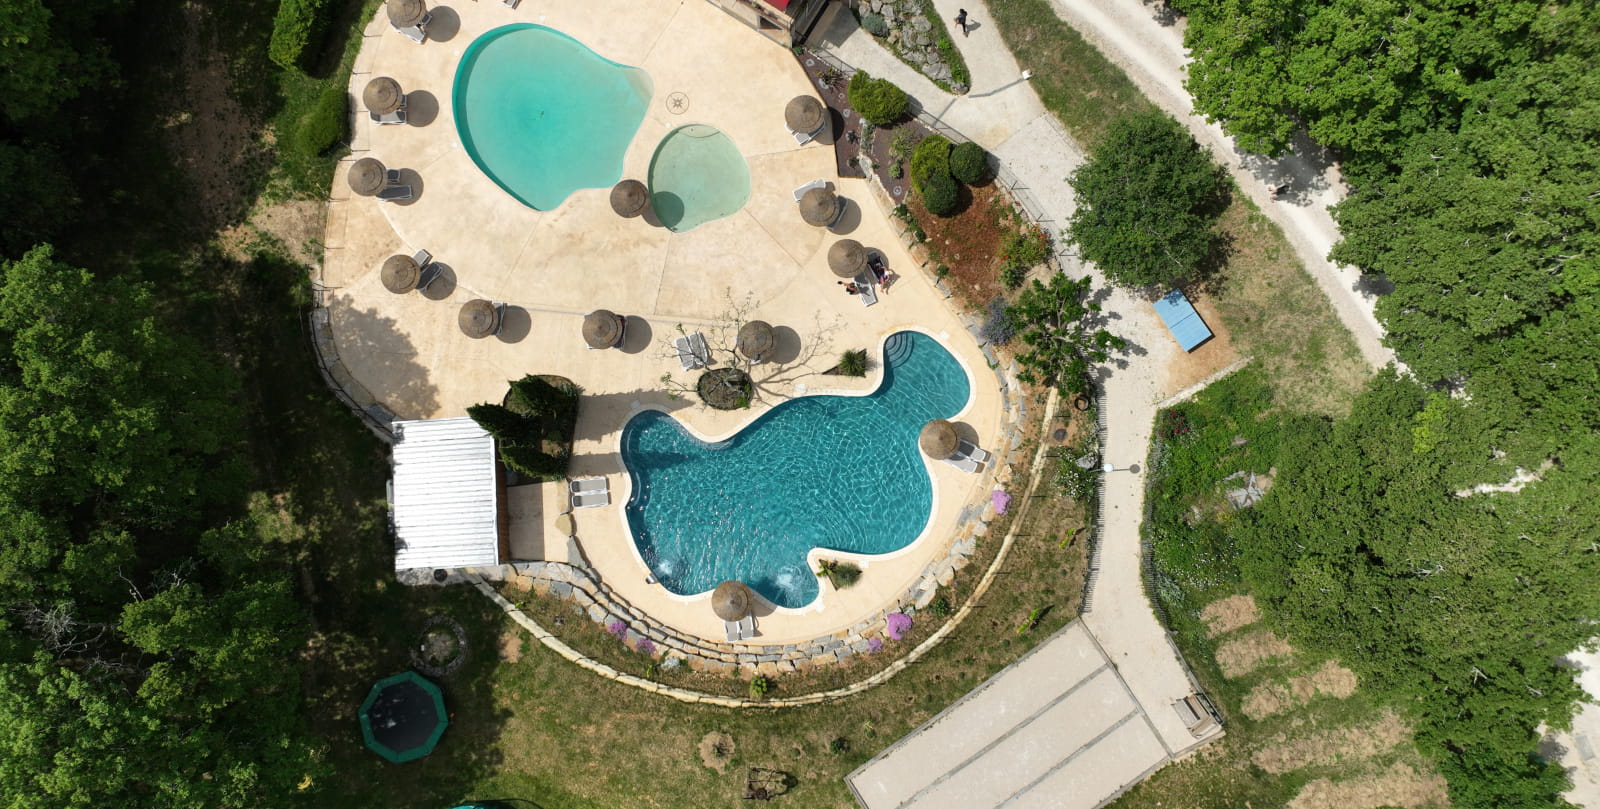 CAMPING LA TRUFFIERE 3 swimming pools 200 m2 of heated pools with balneotherapy and spa*